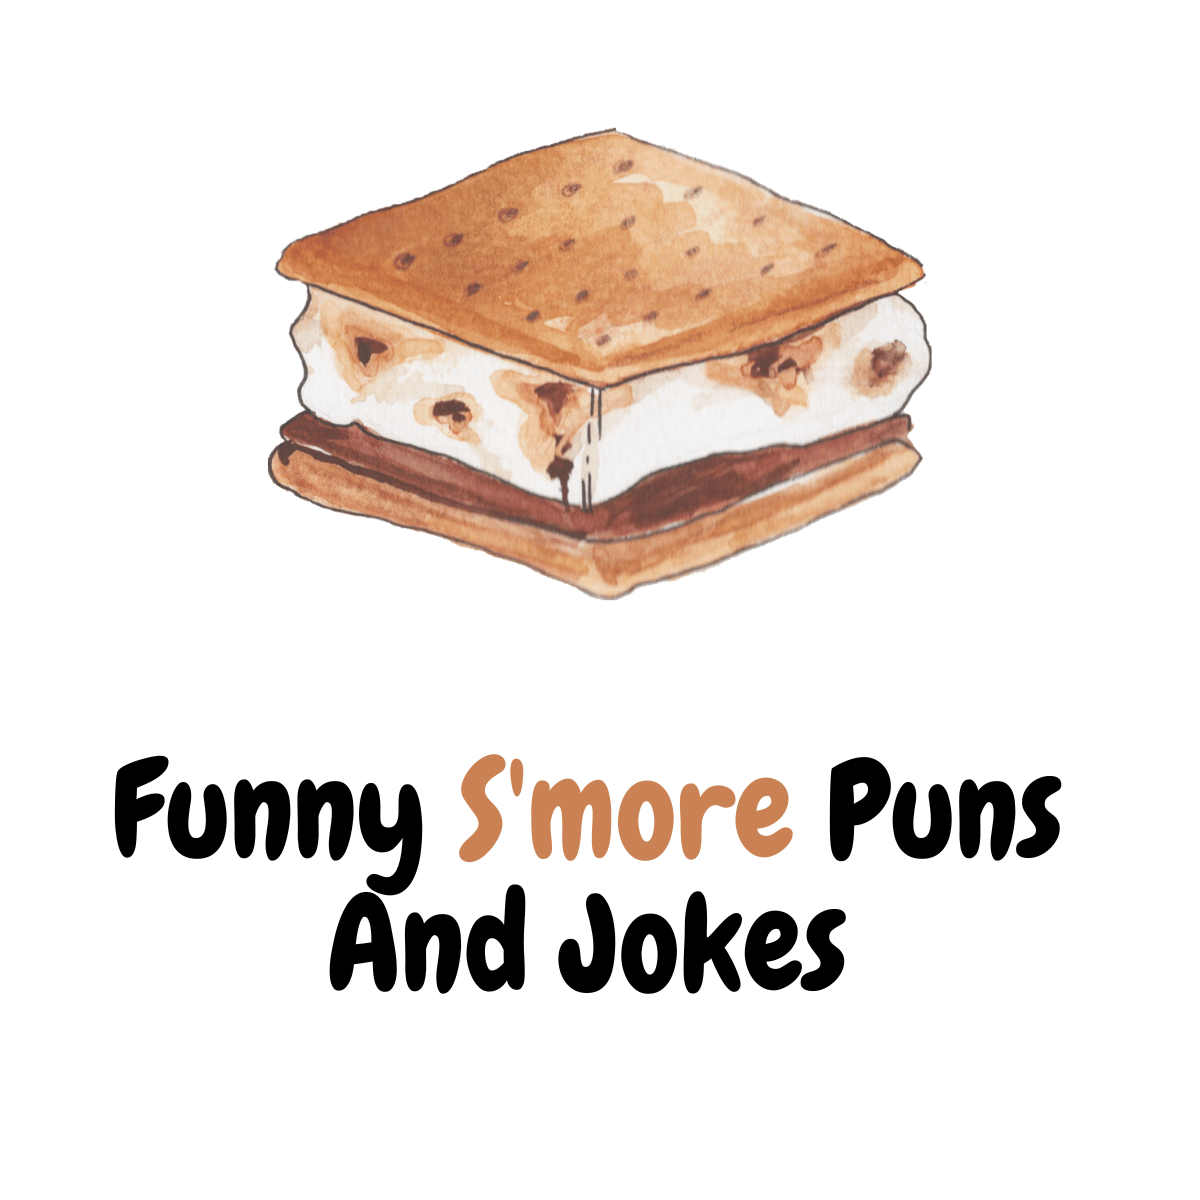 Funny S'more Puns And Jokes